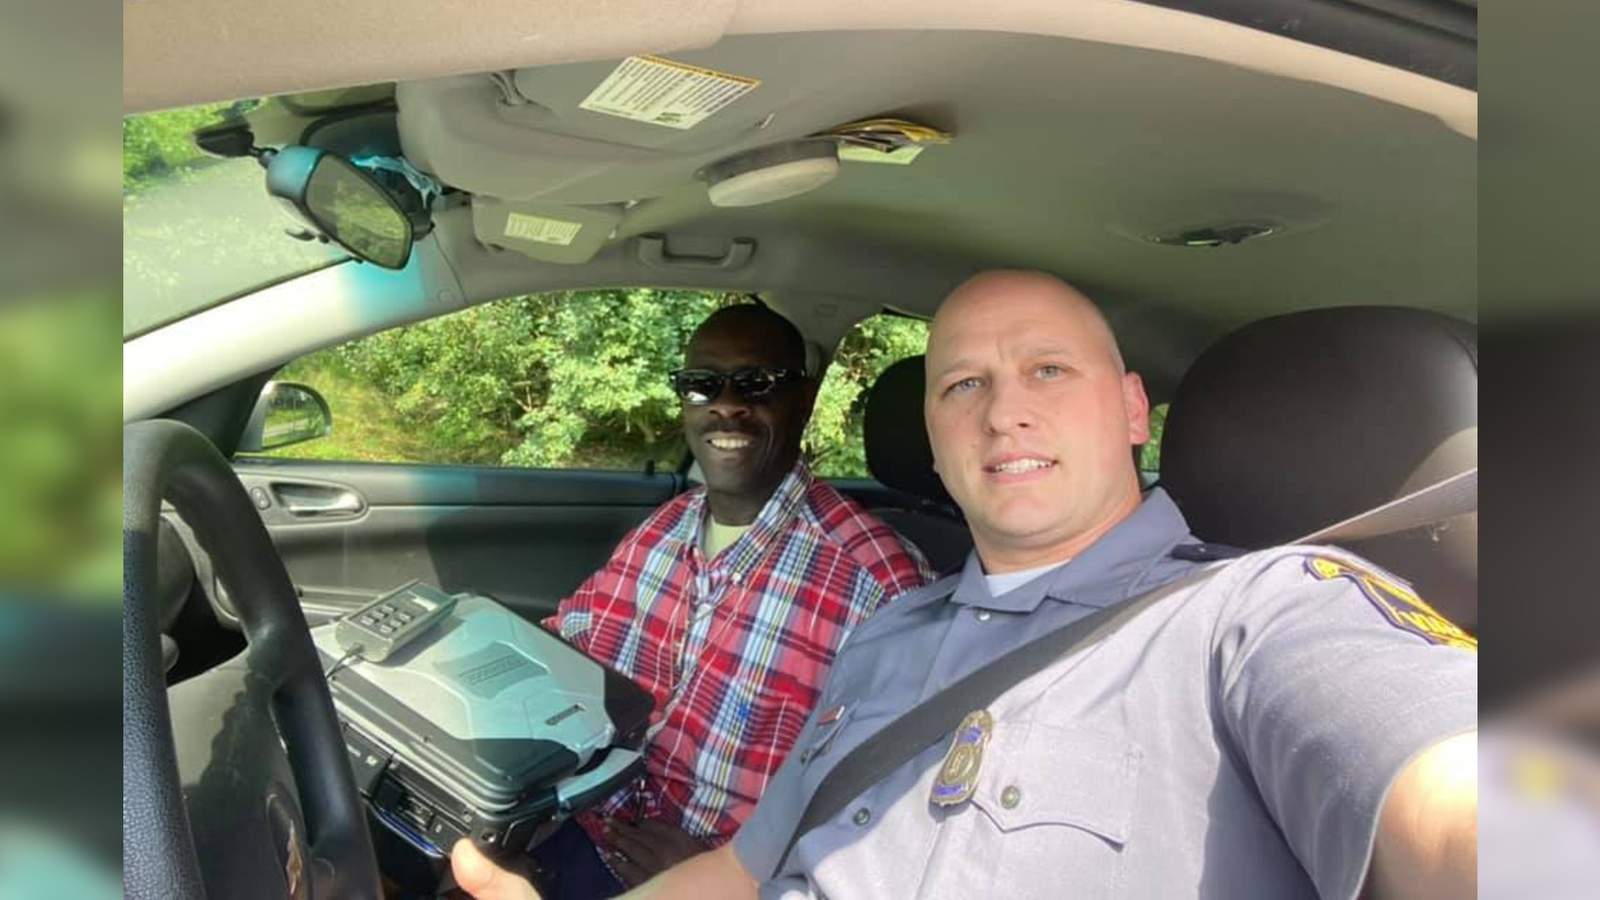 Virginia state trooper posts ‘thank you’ to man after impromptu car ride